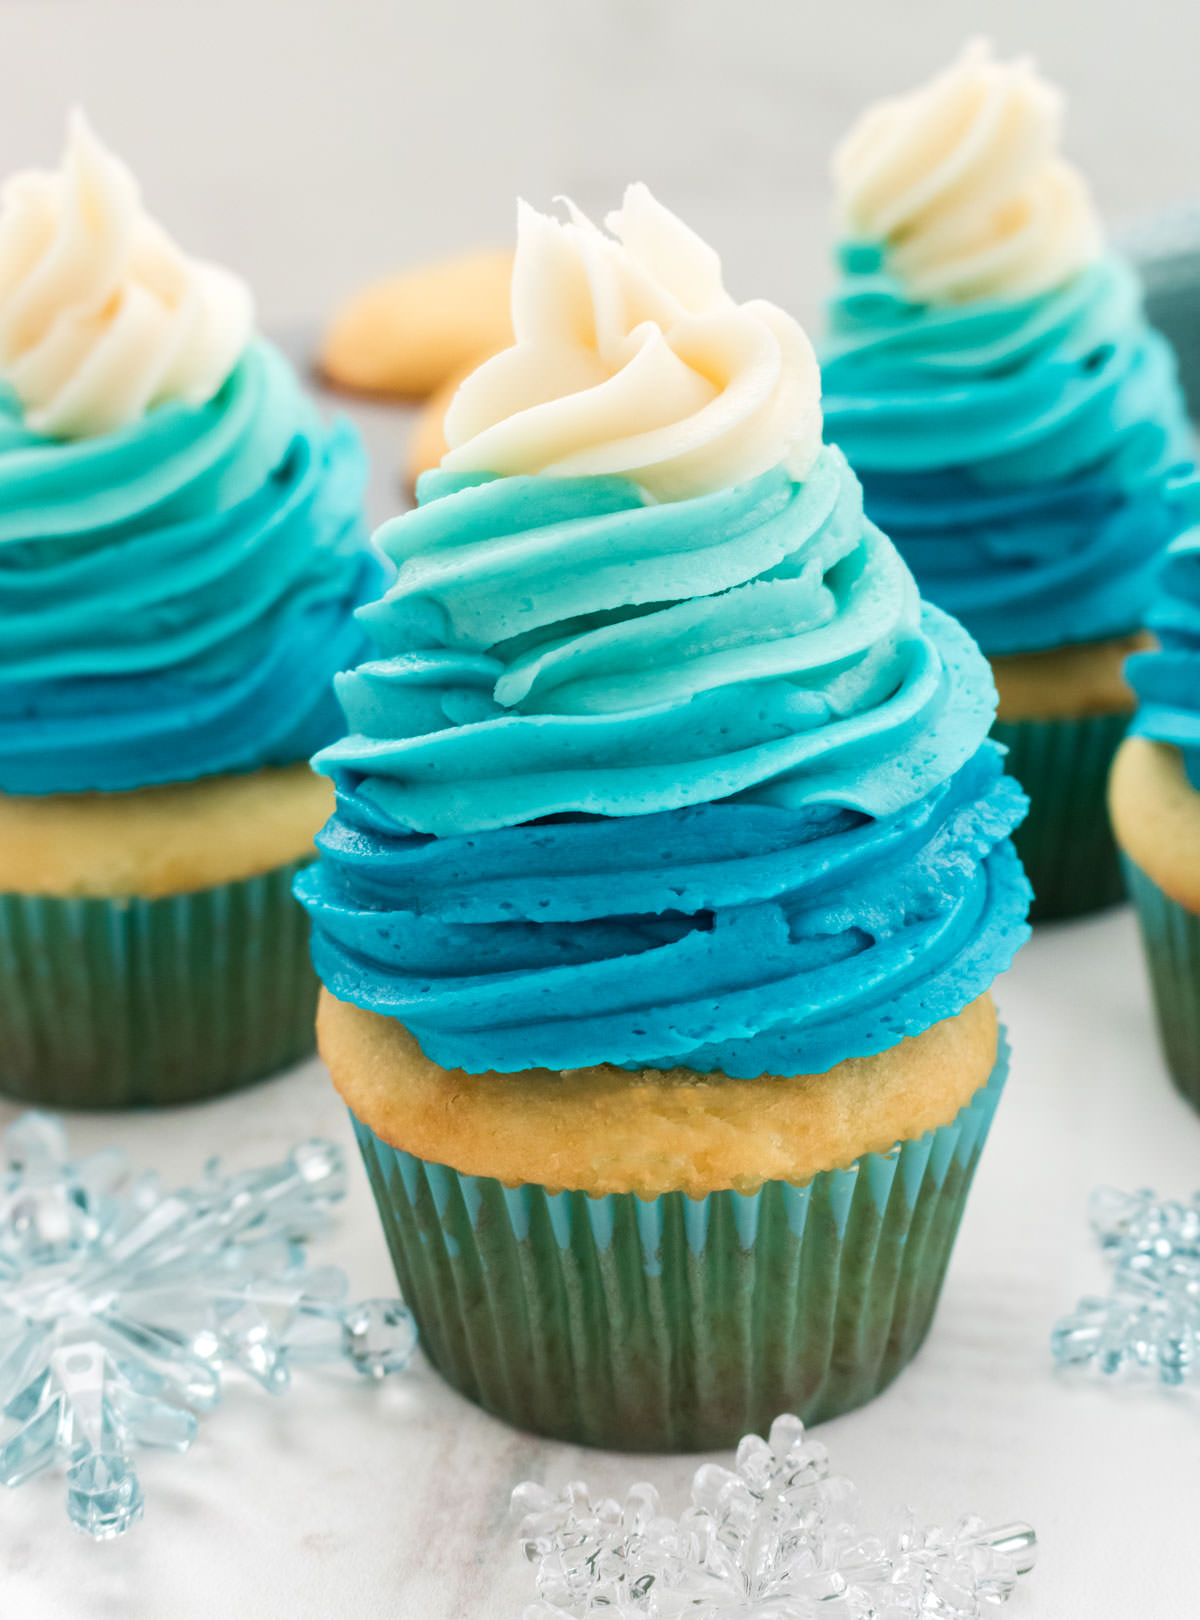 Closeup of a Frozen Ombre Swirl Cupcake sitting on a white surface surrounded by snowflake decorations.